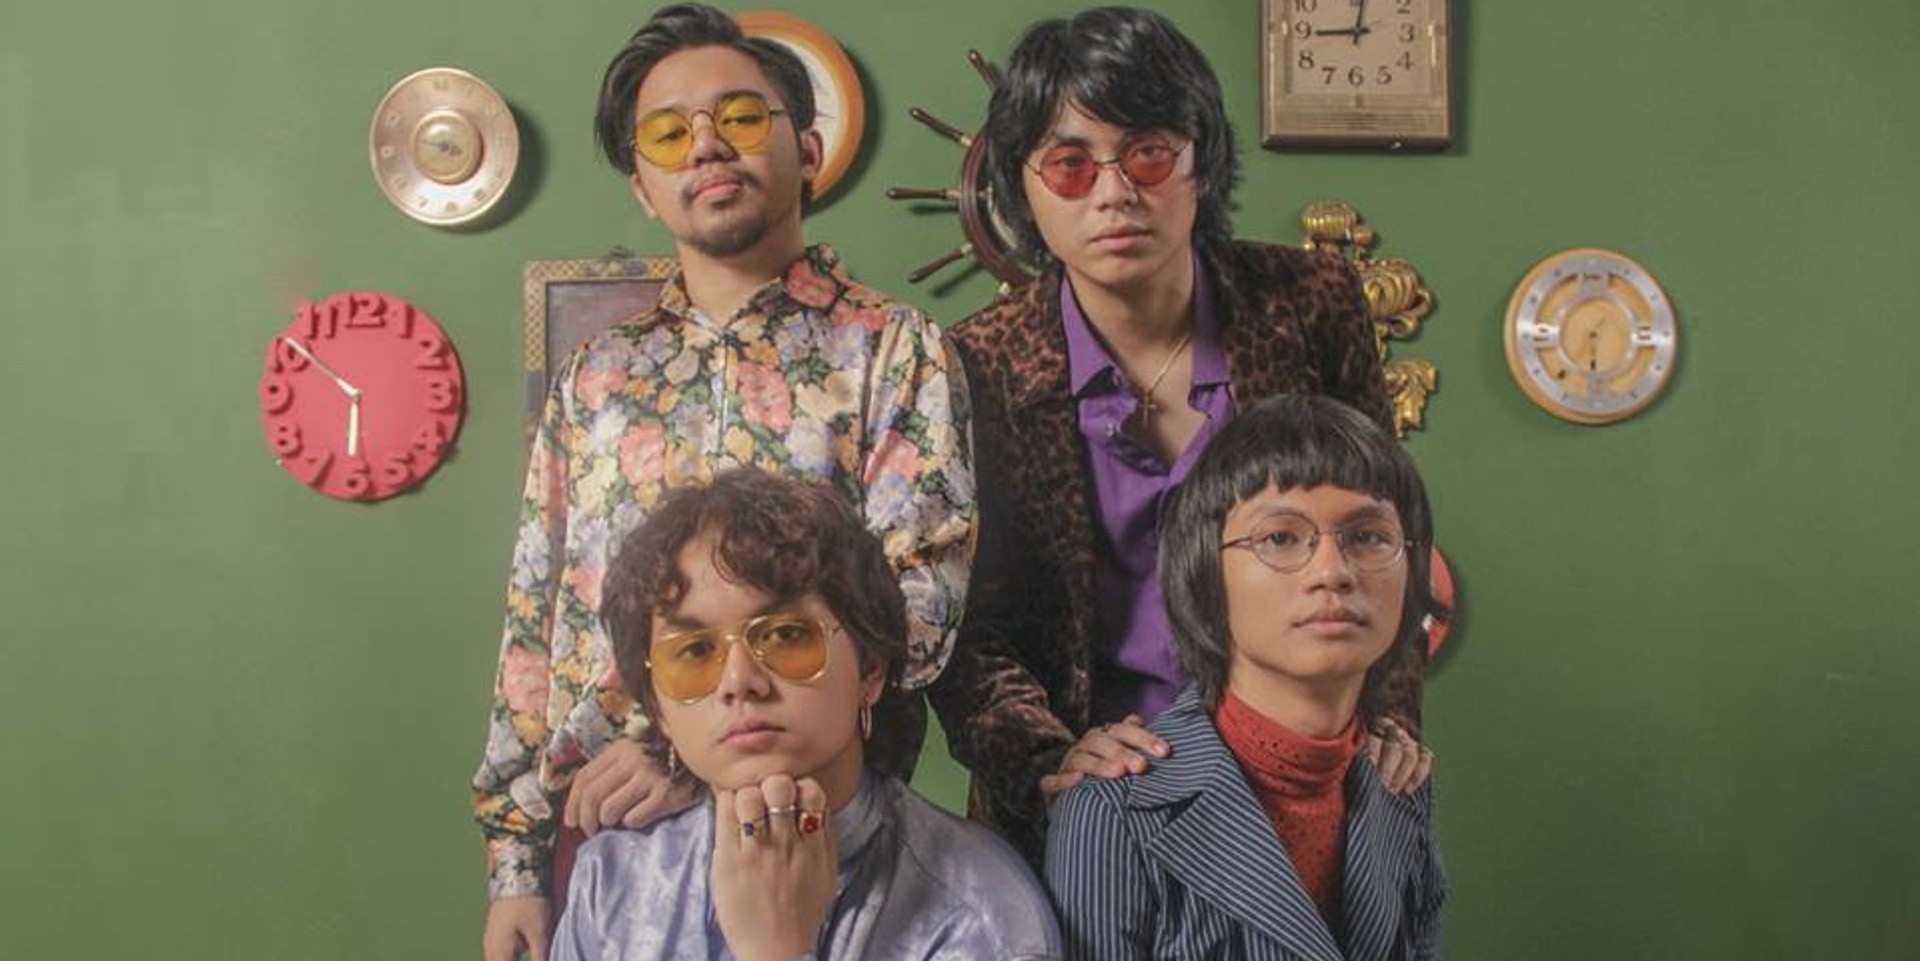 IV of Spades crowned winner of Dreams Come True with AirAsia